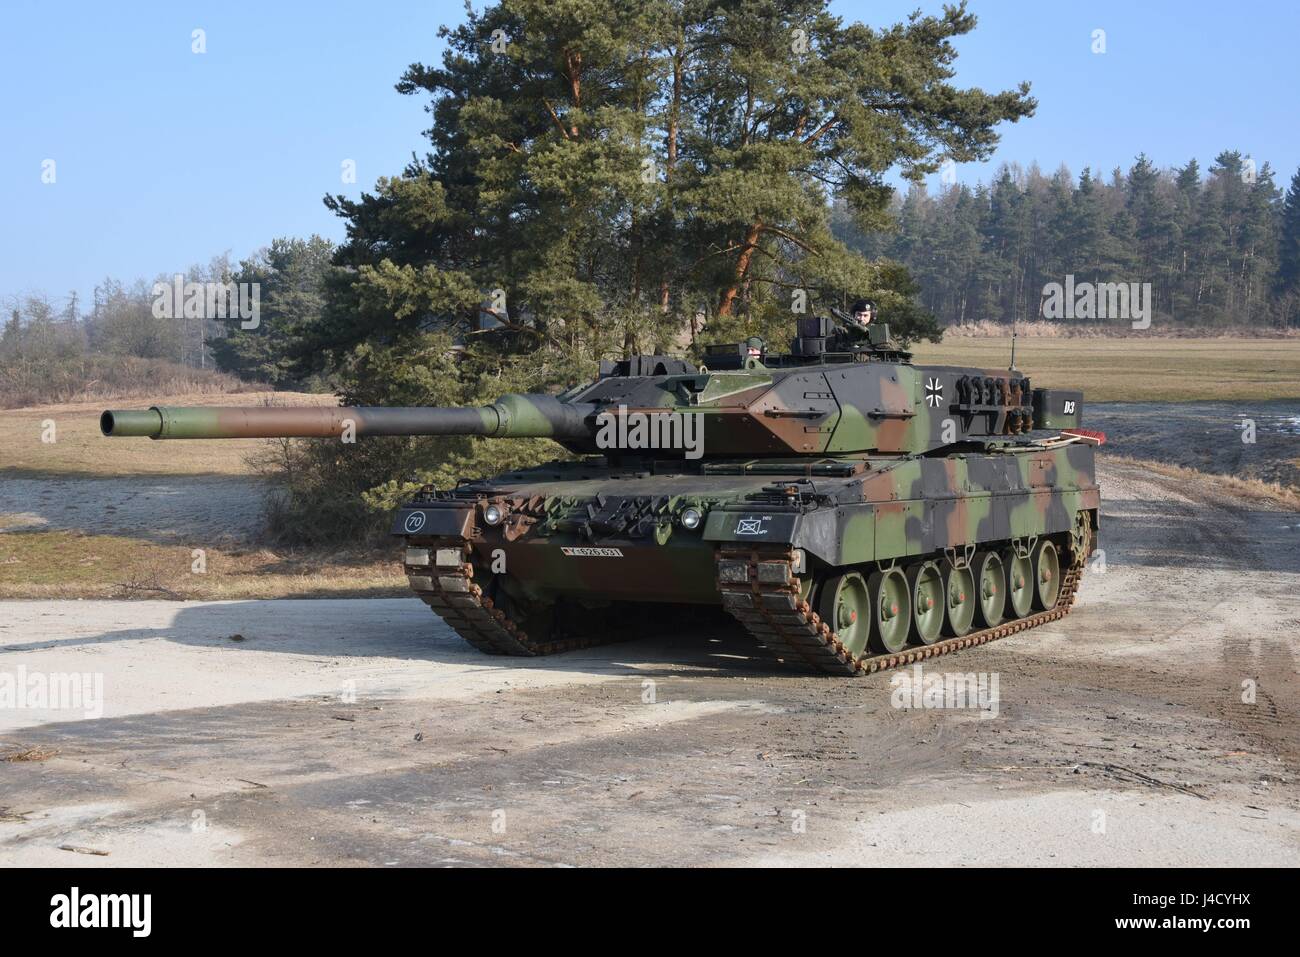 Leopard 2A6 main battle tank of Panzerbataillon 104 before the deployment  to Lithuania as part of the NATO initiative enhanced Forward Presence  (eFP). The Bundeswehr deployed six Leopard 2A6 MBTs to support